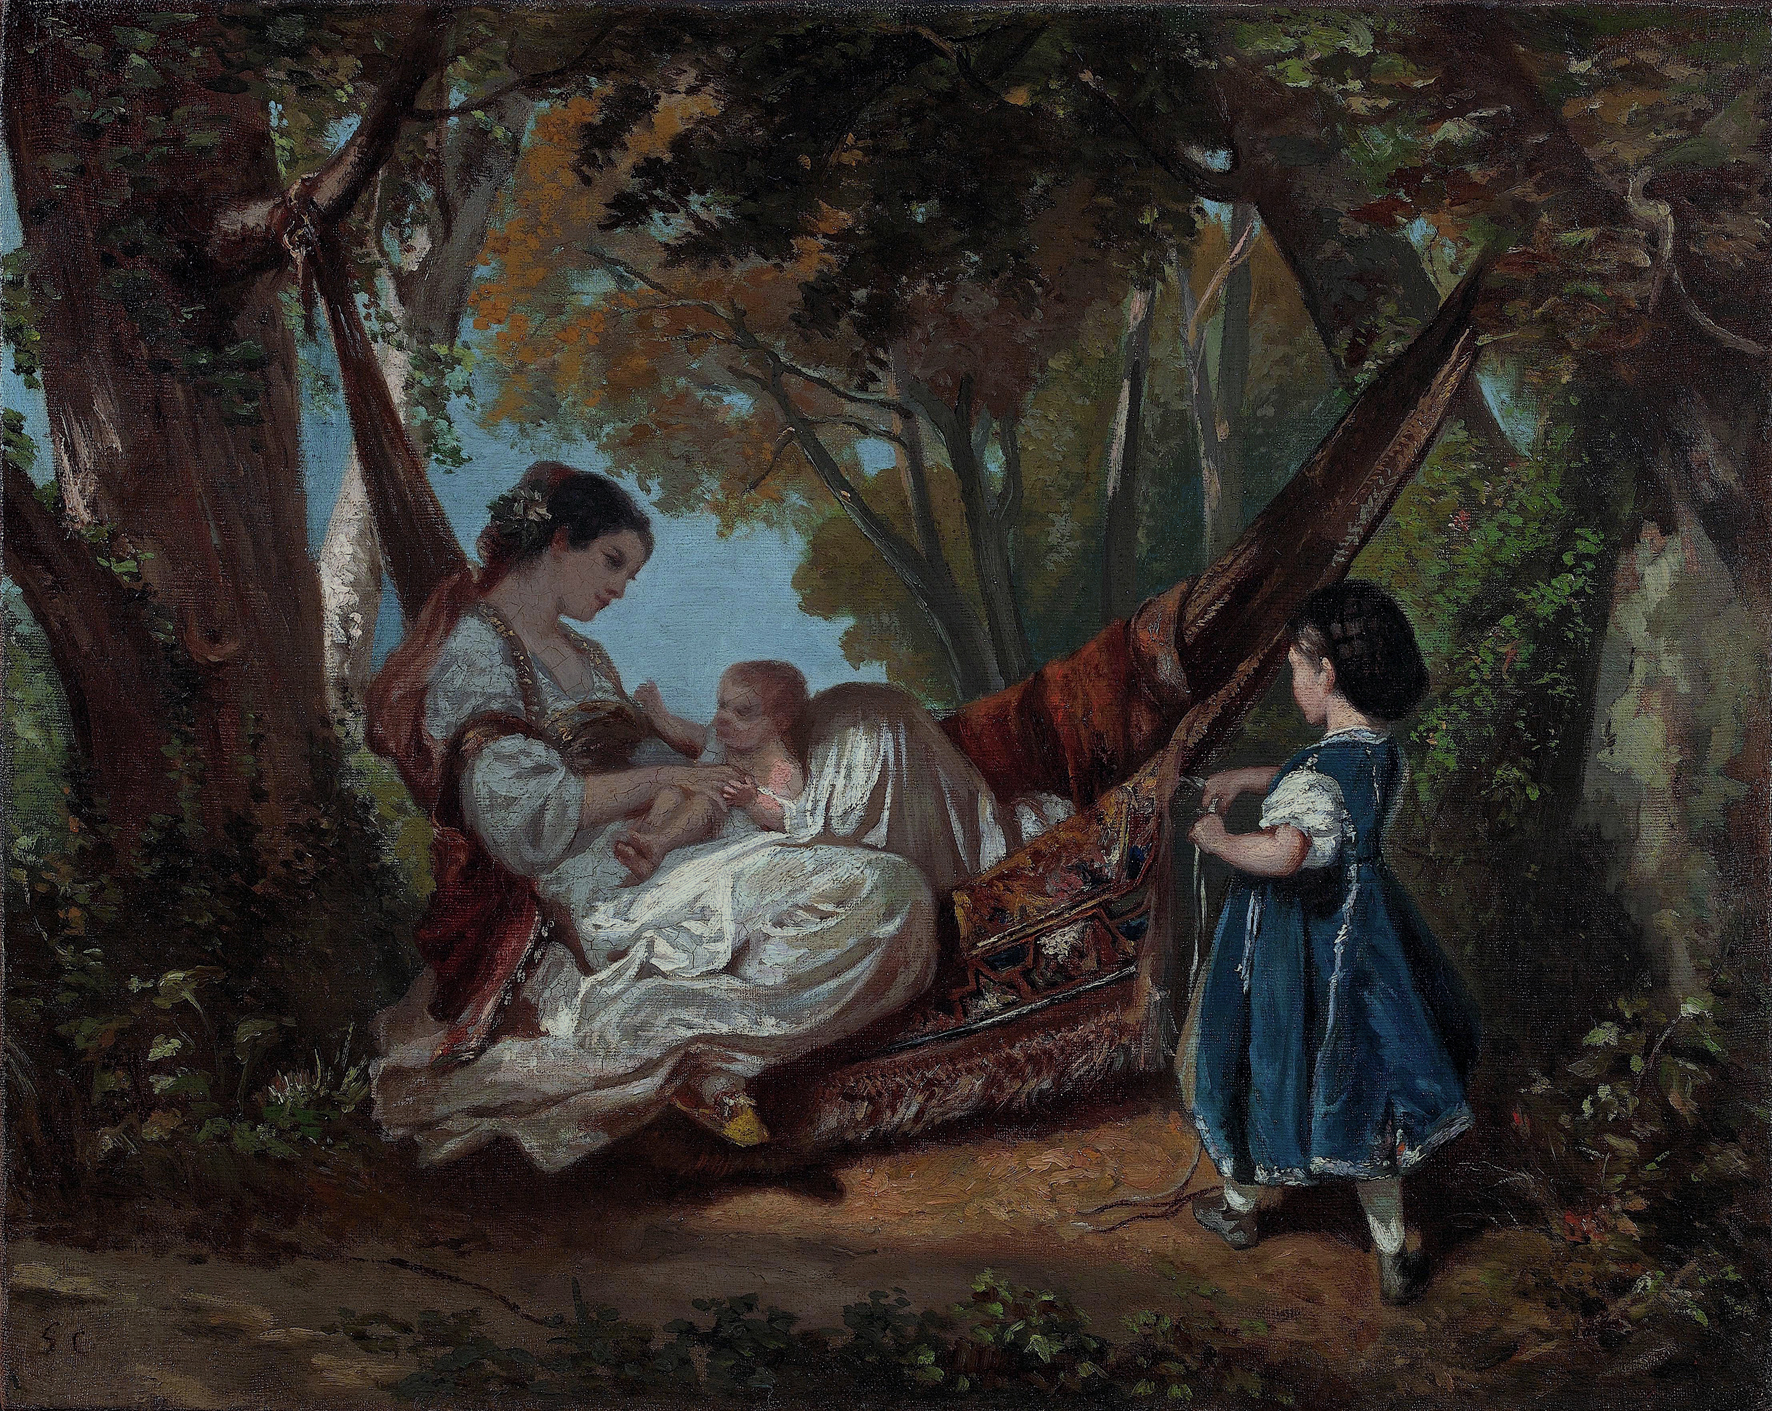 Mother and Child on a Hammock